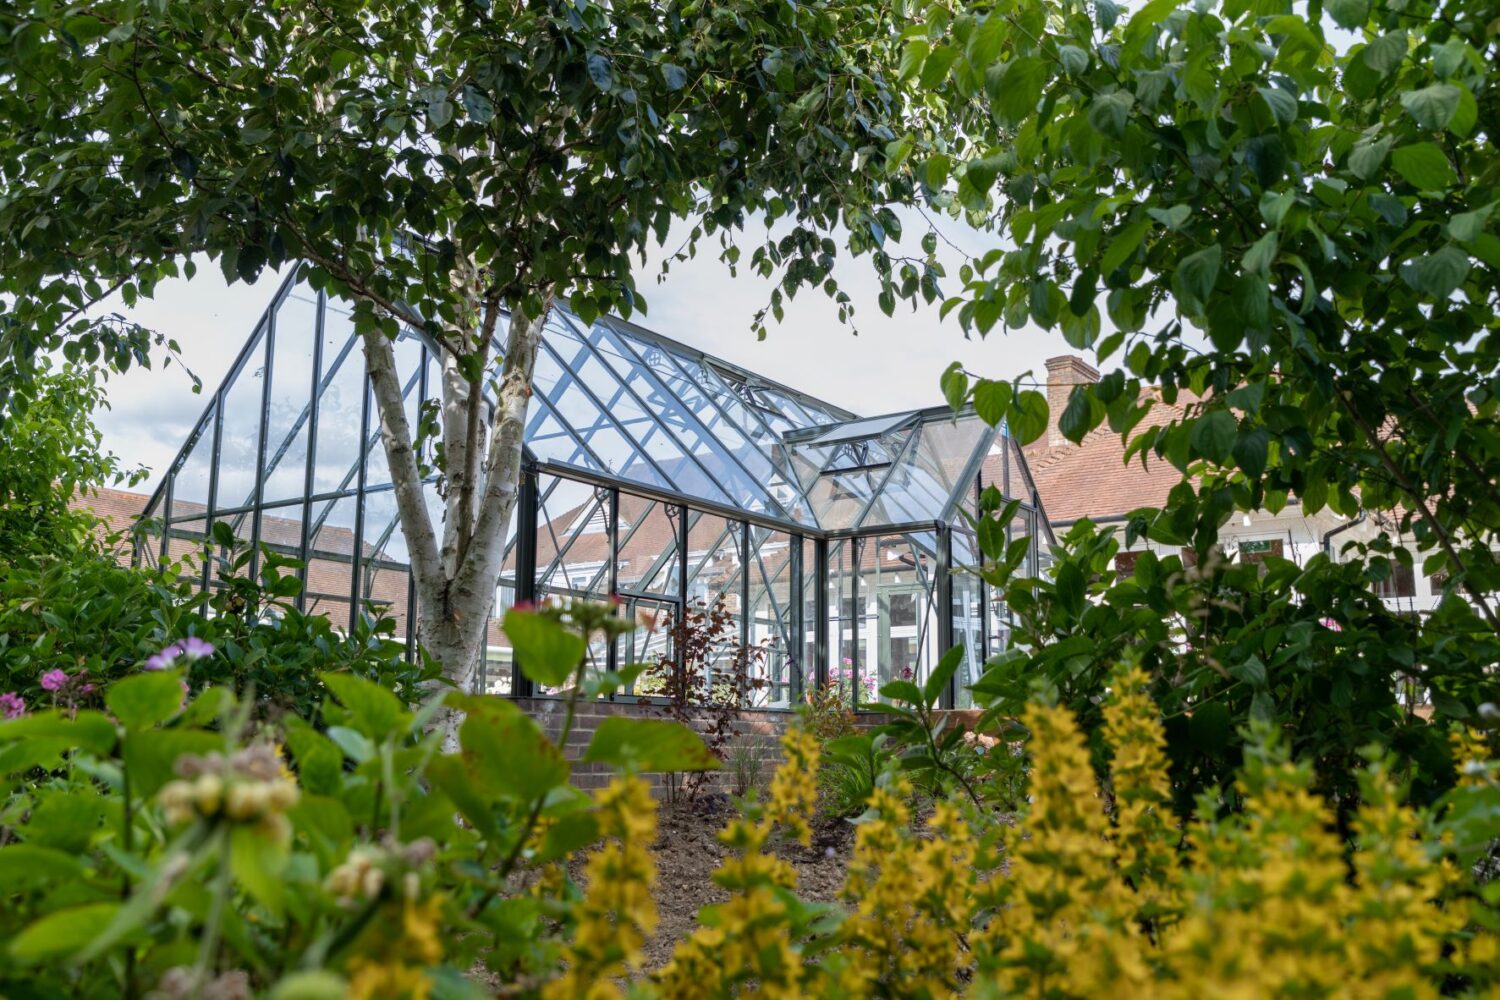 Greenhouse through the trees, in the Garden